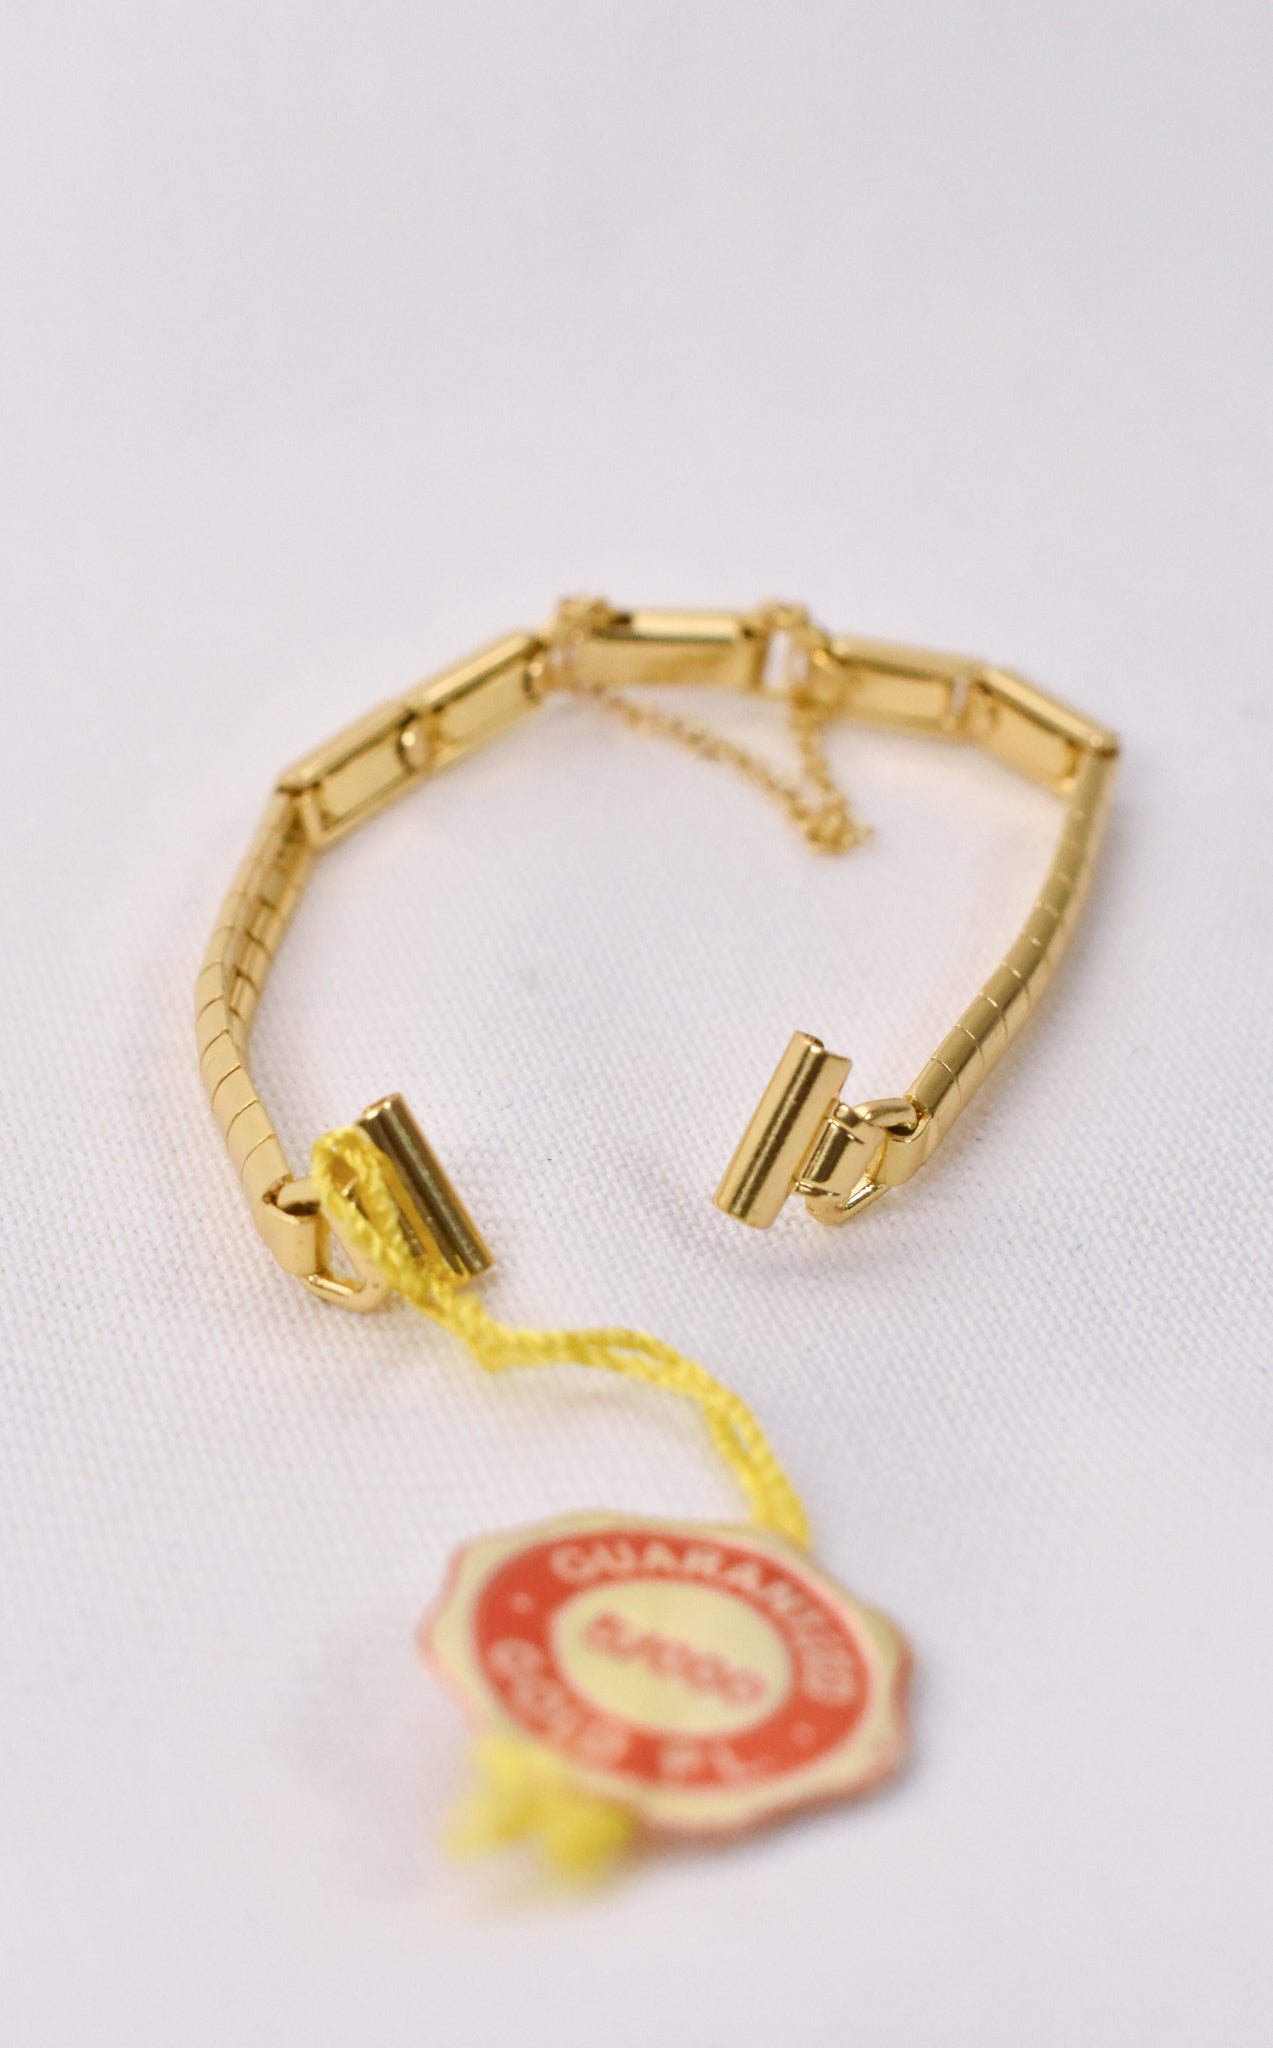 German vintage gold plated watch band